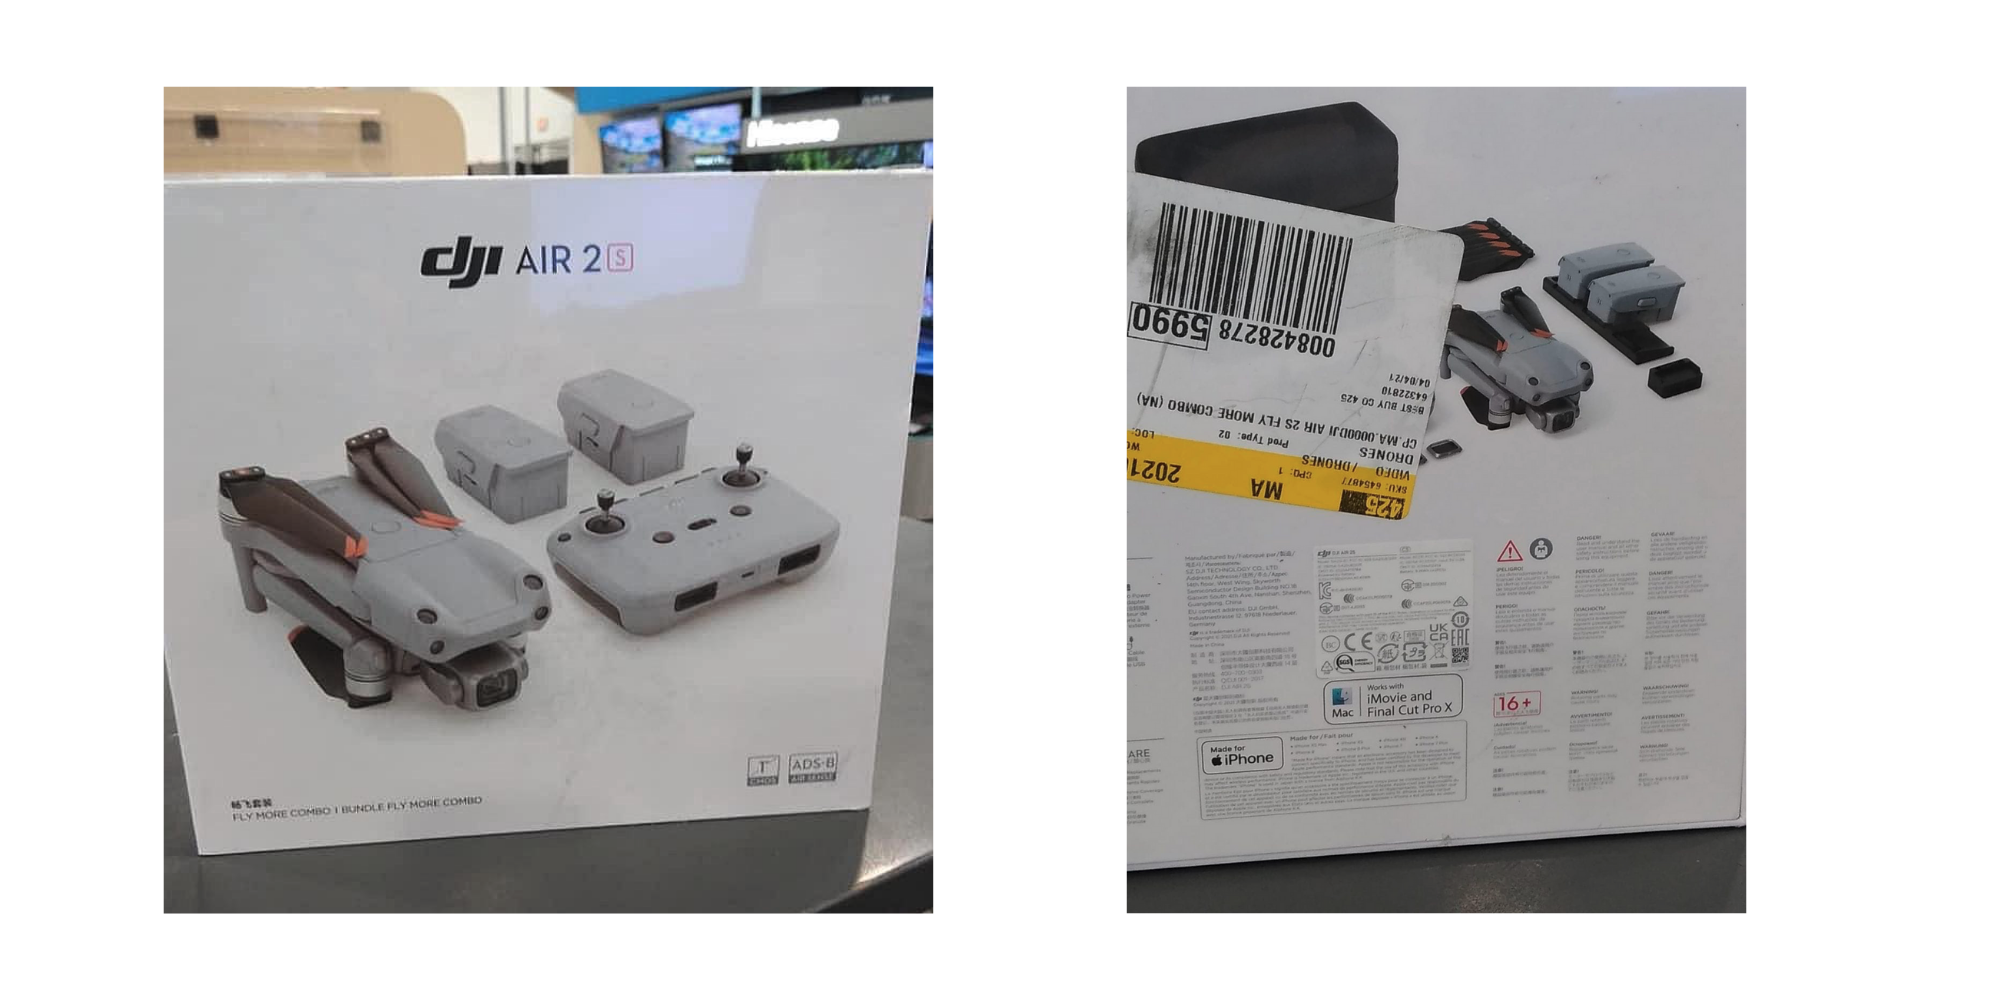 DJI Air 2S spotted on shelves at North Carolina Best Buy - DroneDJ